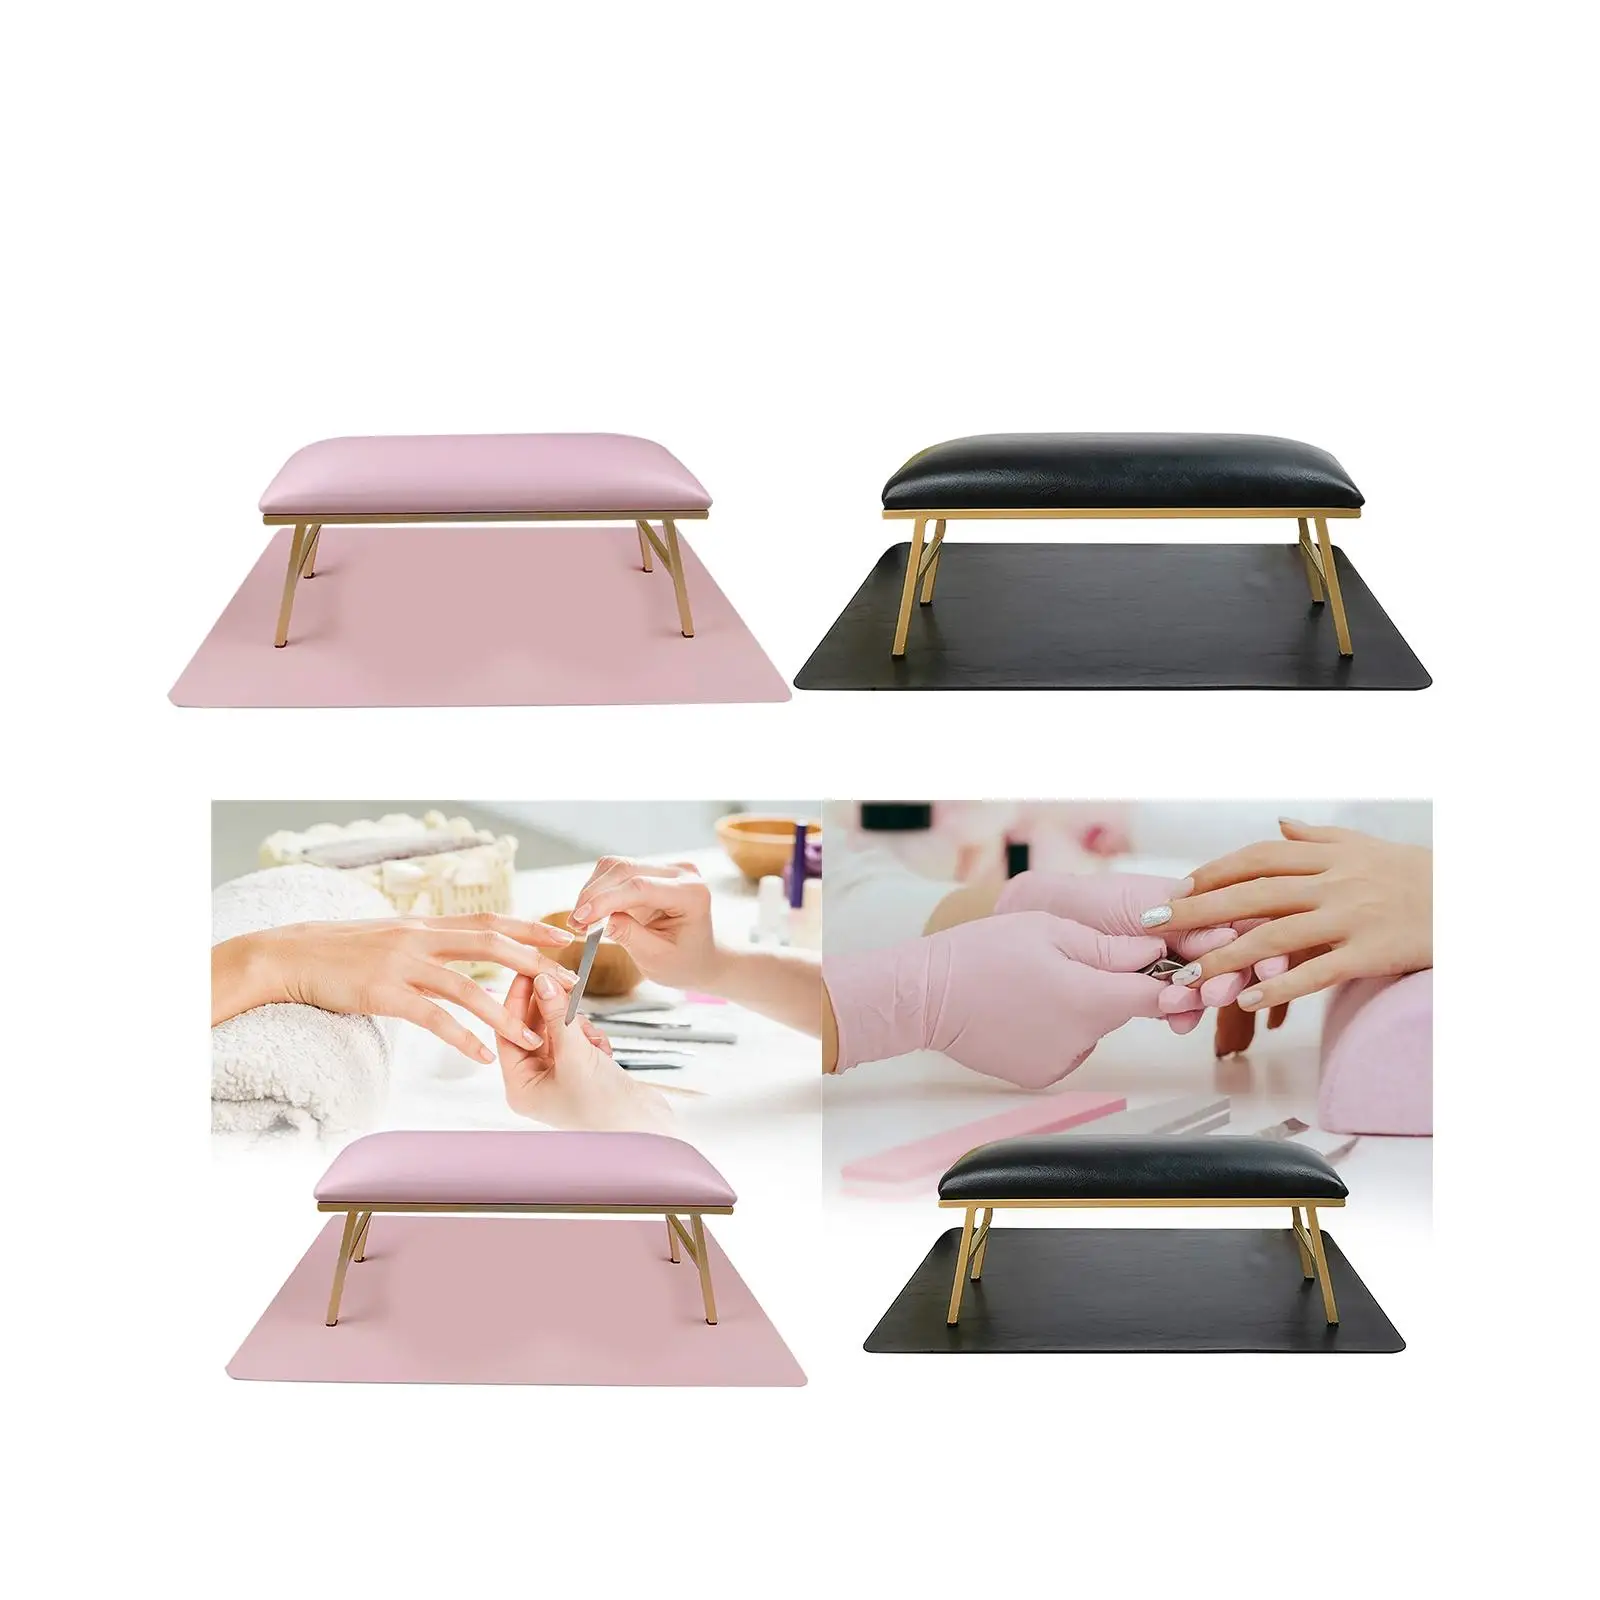 Nail Art Hand Pillow and Mat Professional PU Leather Table Soft Wrist Arm Pad Nail Hand Rest for Salon Home Nail Technician Use